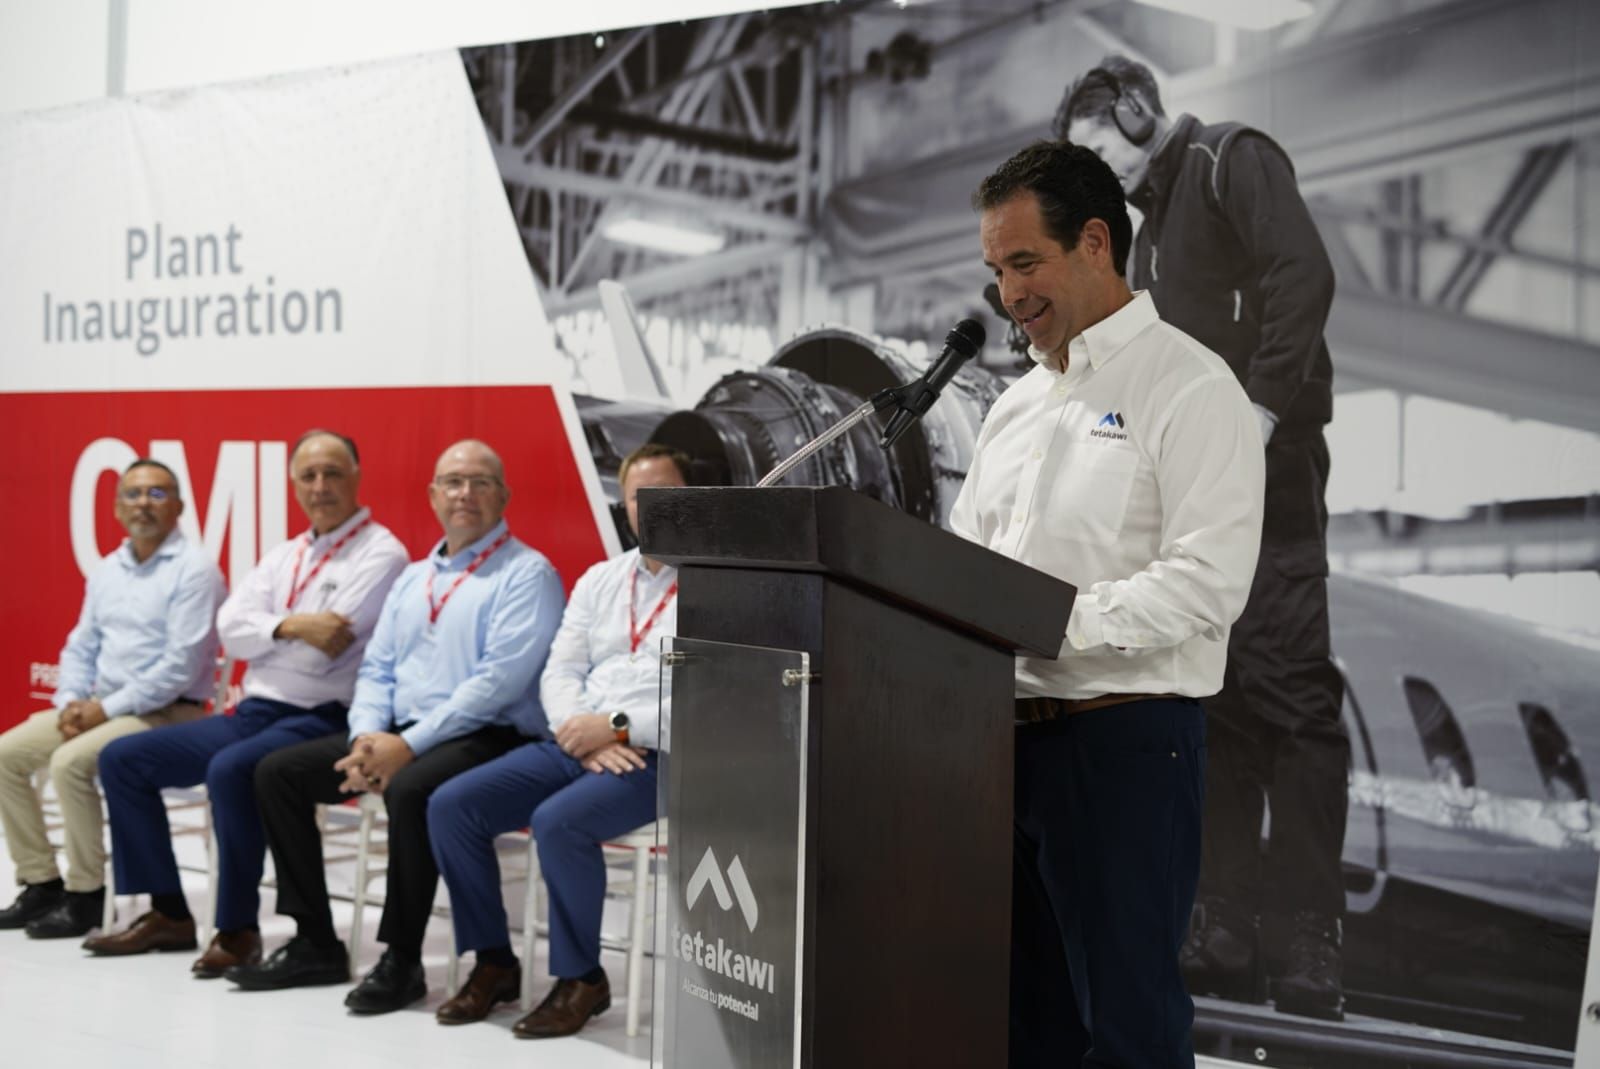 CMI Group inaugurates factory in Guaymas, Sonora